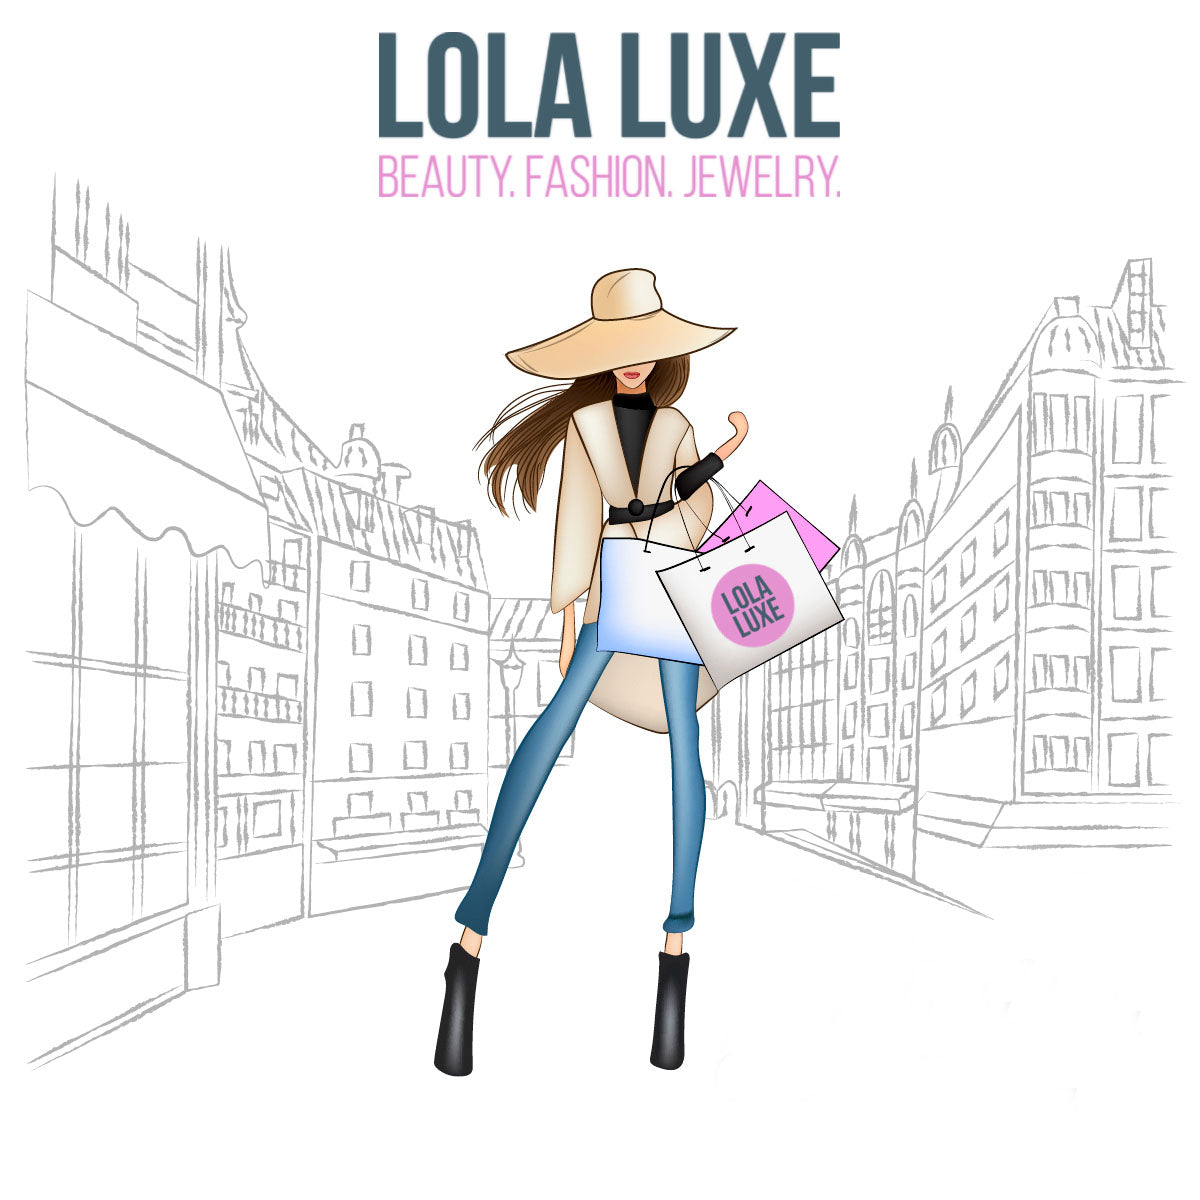 LOLA LUXE SHOP illustration of a young woman with long brunette hair blowing in the wind with a floppy brim light beige hat on, a tan car coat with a belt, skinny blue jeans and black ankle boots. The illustration says LOLA LUXE BEAUTY. FASHION. JEWELRY